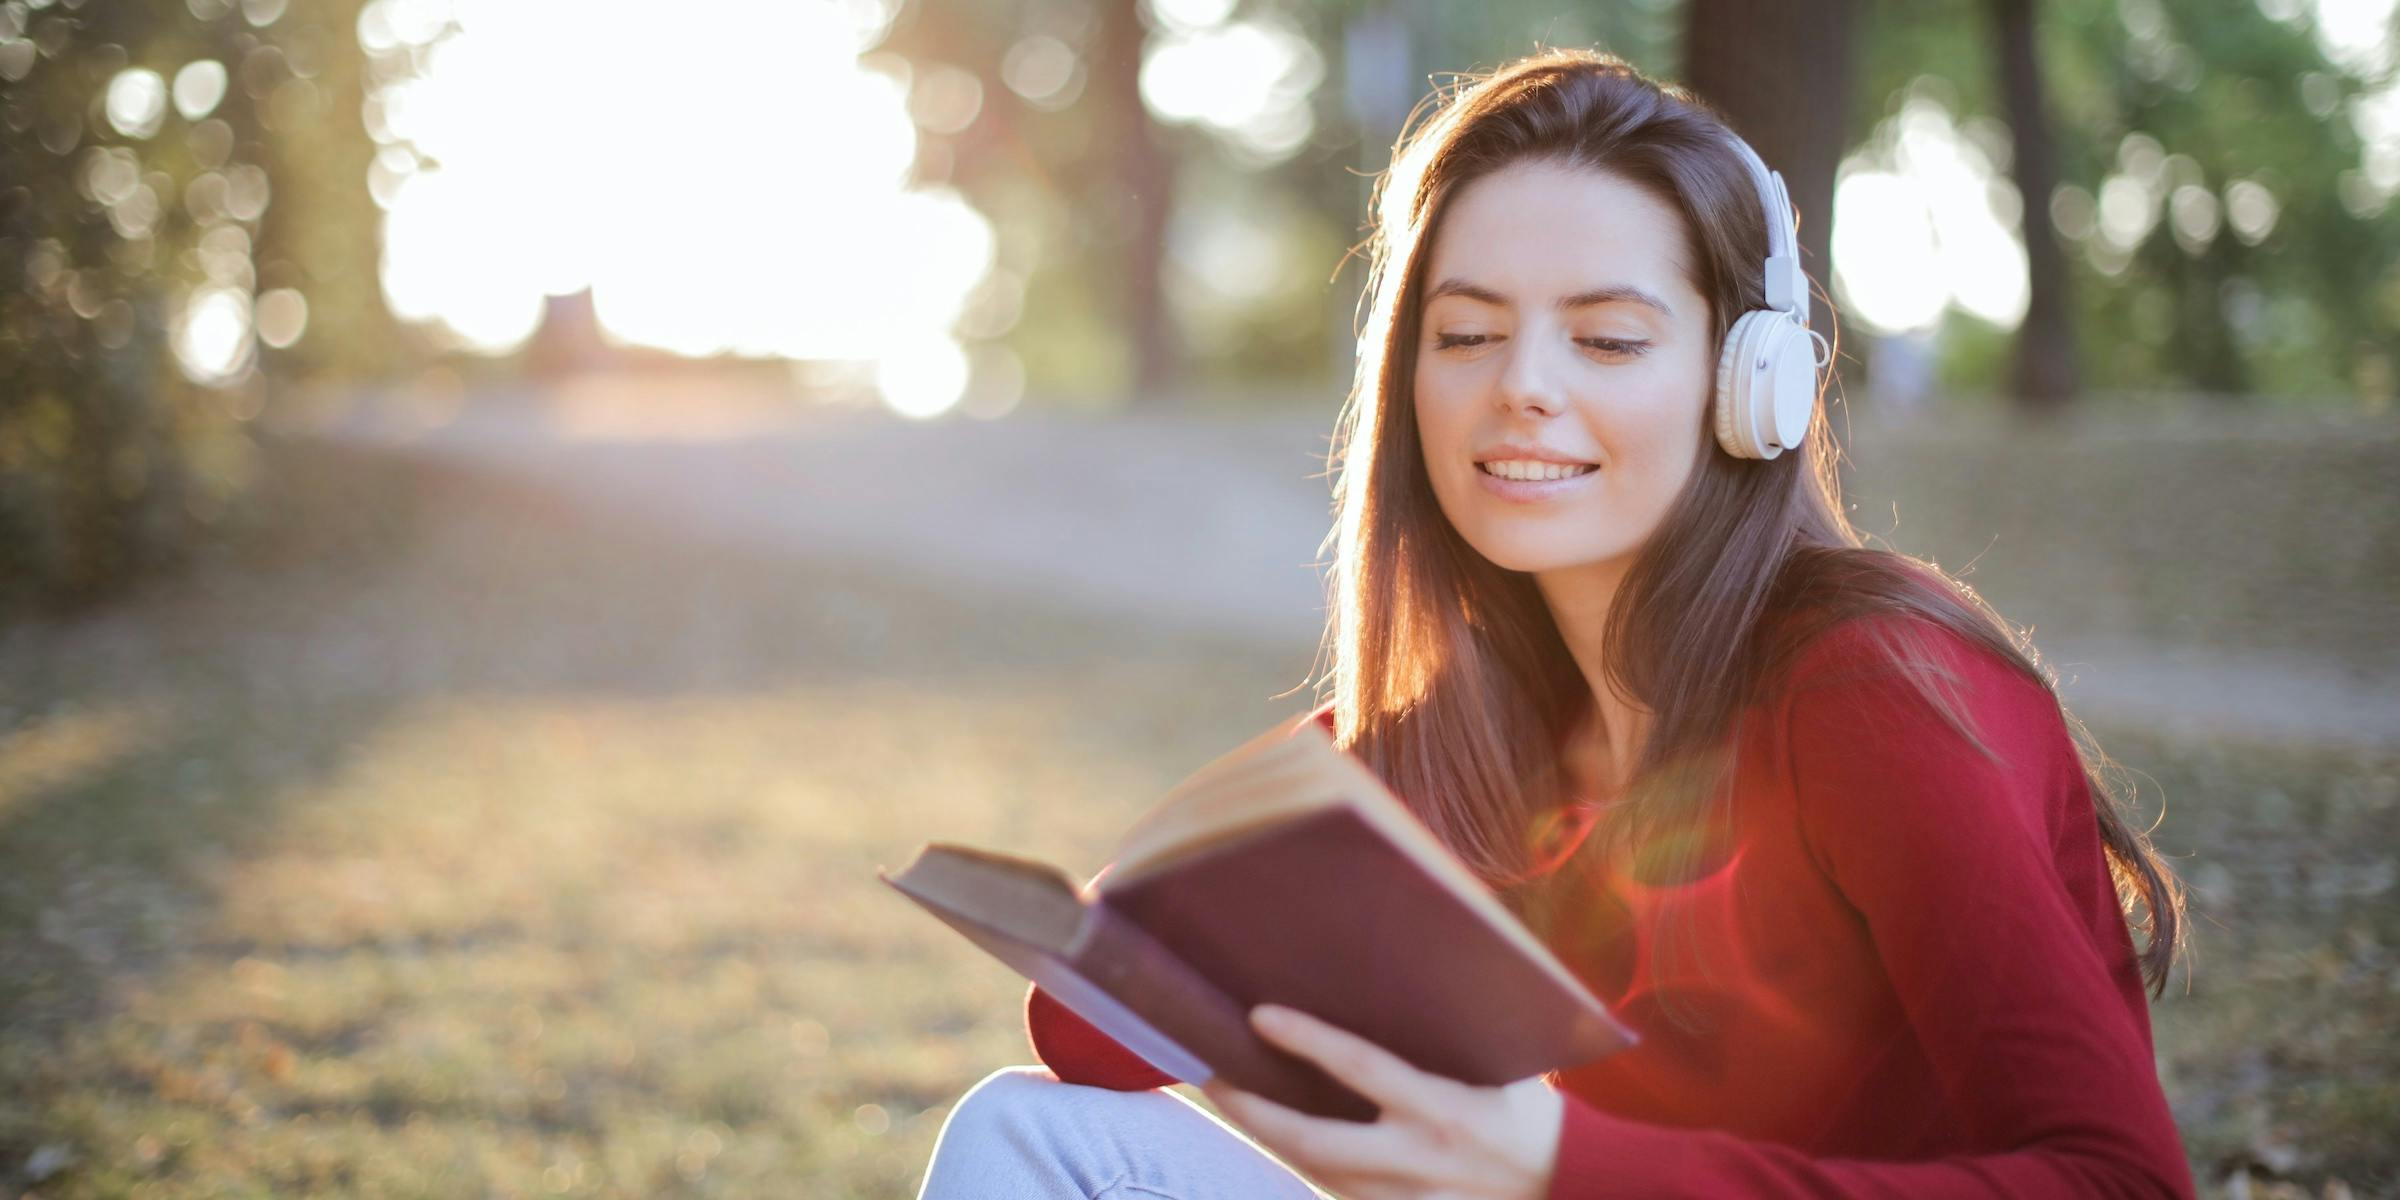 Young woman in a field wearing headphones while reading a book.